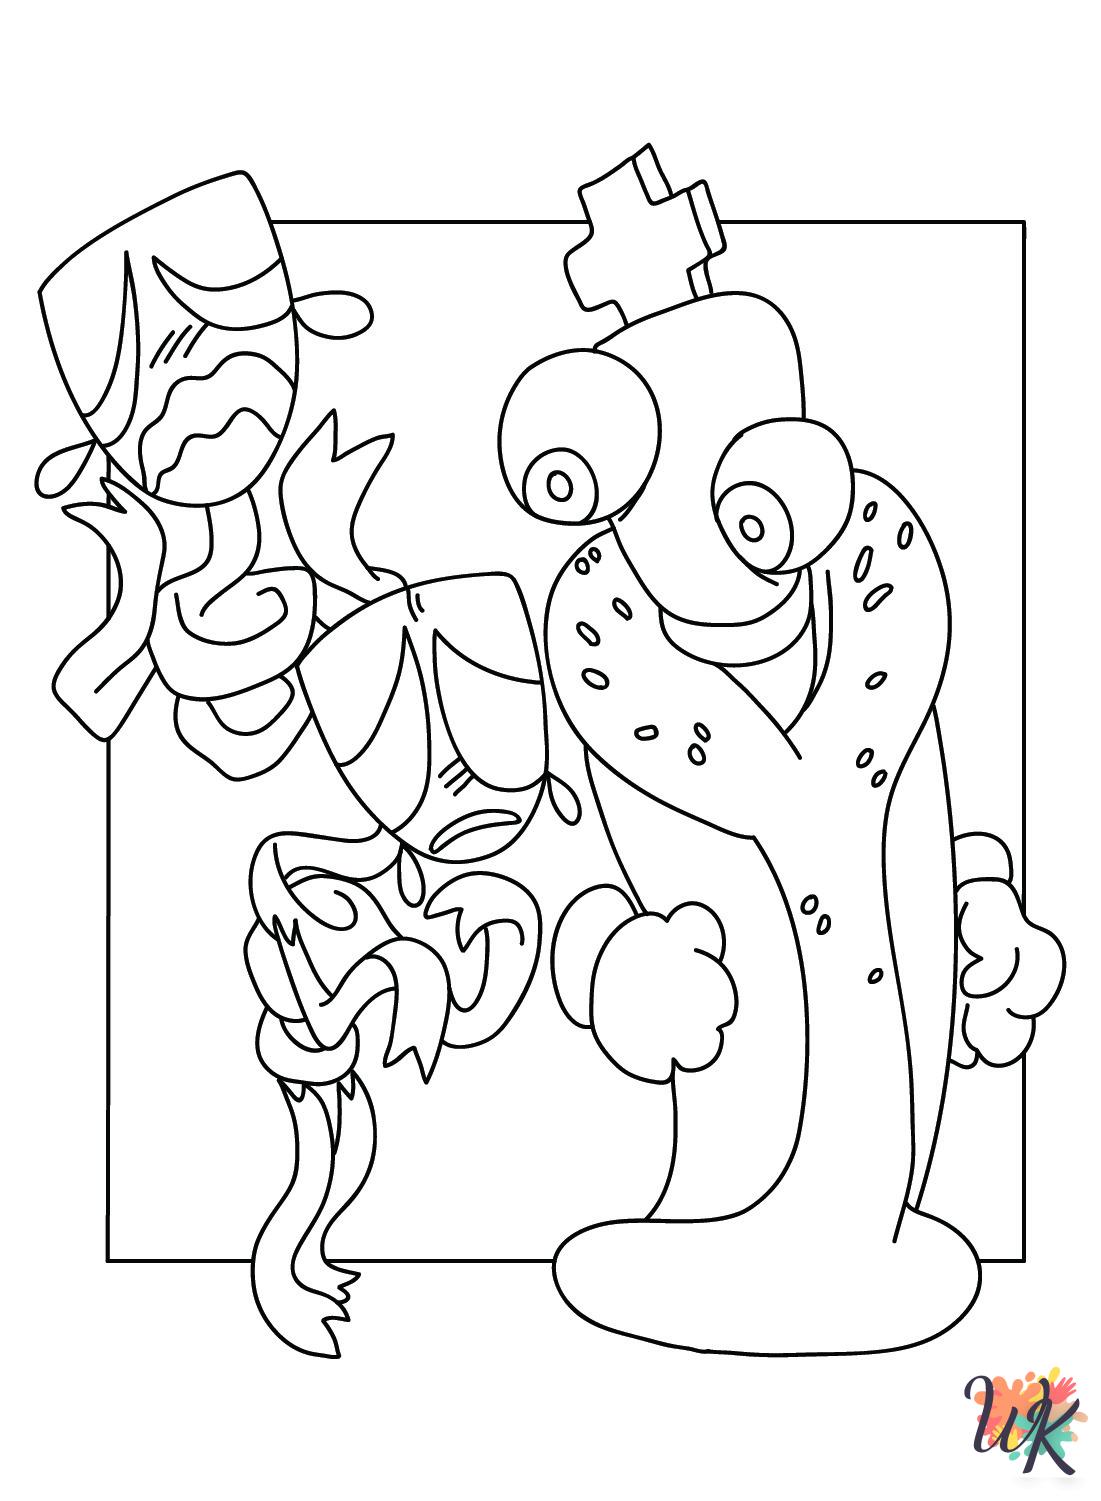 The Amazing Digital Circus Coloring Pages 16